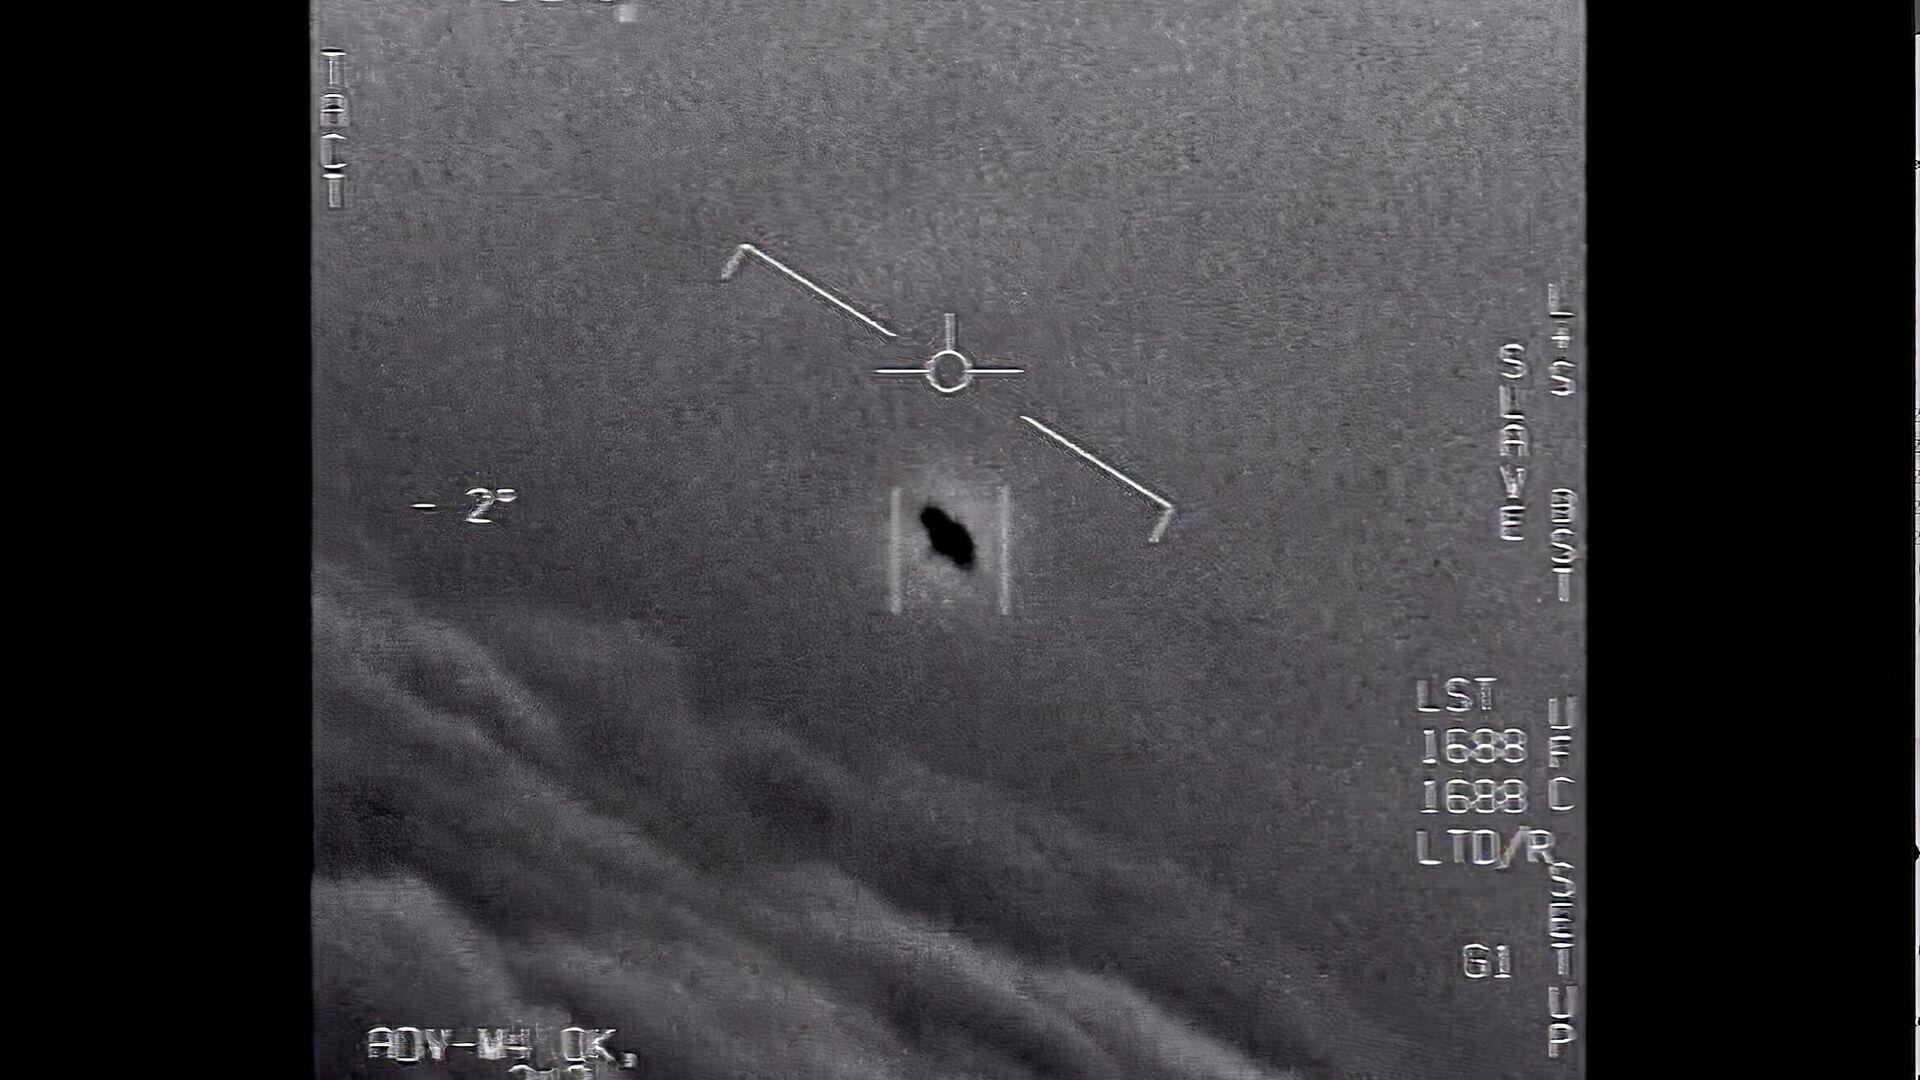 The image from video provided by the Department of Defense labelled Gimbal, from 2015, an unexplained object is seen at center as it is tracked as it soars high along the clouds, traveling against the wind.  - Sputnik International, 1920, 07.04.2022